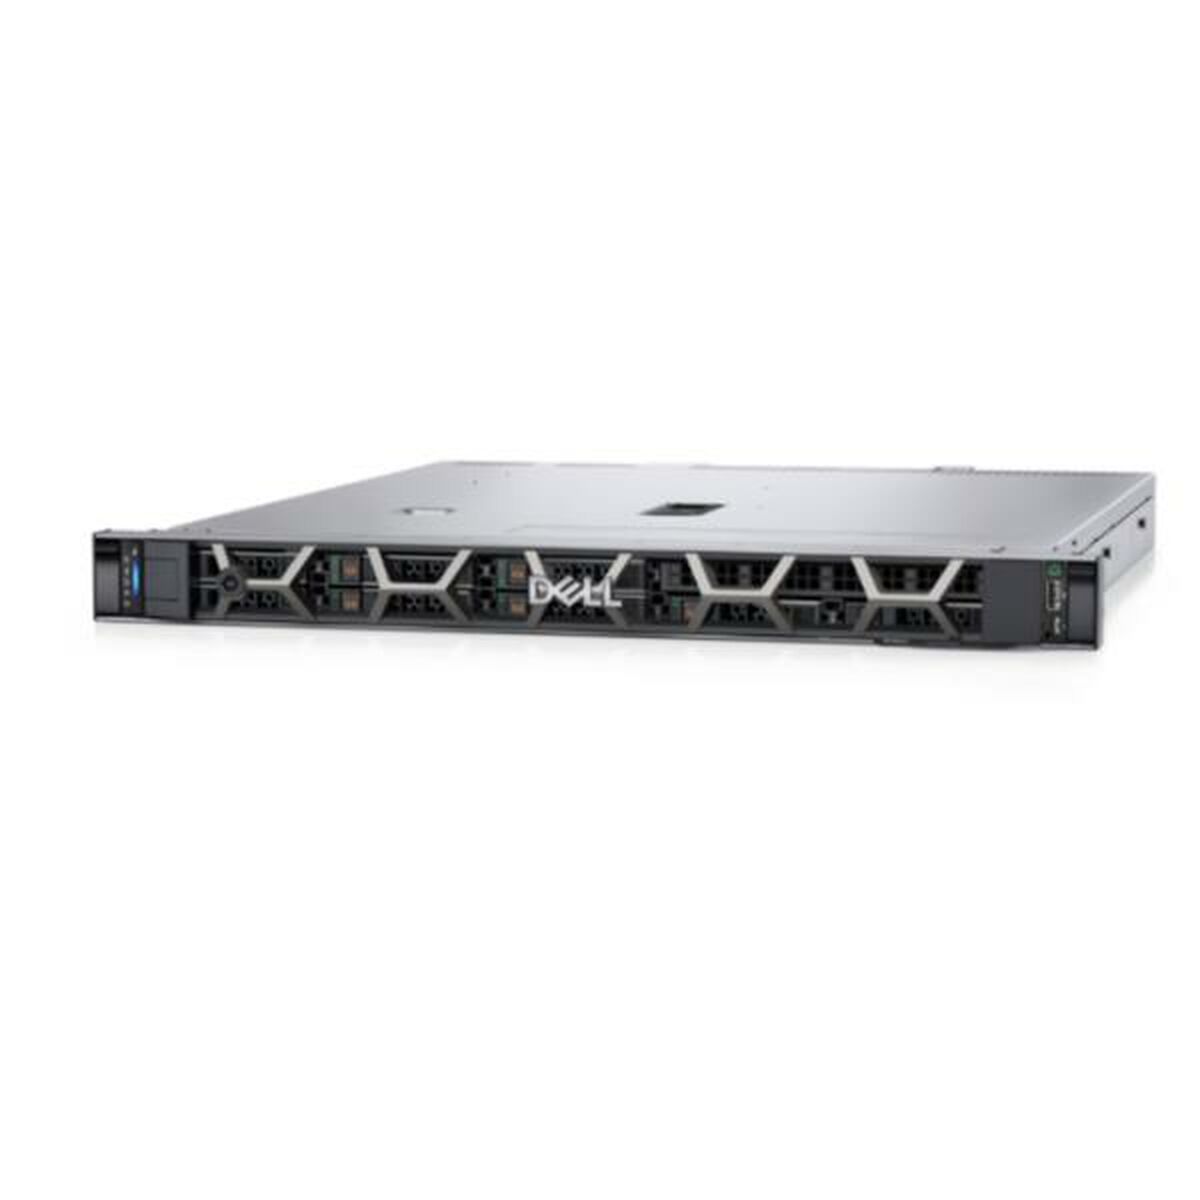 Server Dell R350 IXE-2336 480 GB SSD, Dell, Computing, server-dell-r350-ixe-2336-16-gb-ram-480-gb-ssd, :480 GB, Brand_Dell, category-reference-2609, category-reference-2791, category-reference-2799, category-reference-t-19685, category-reference-t-19905, computers / components, Condition_NEW, office, Price_+ 1000, Teleworking, RiotNook